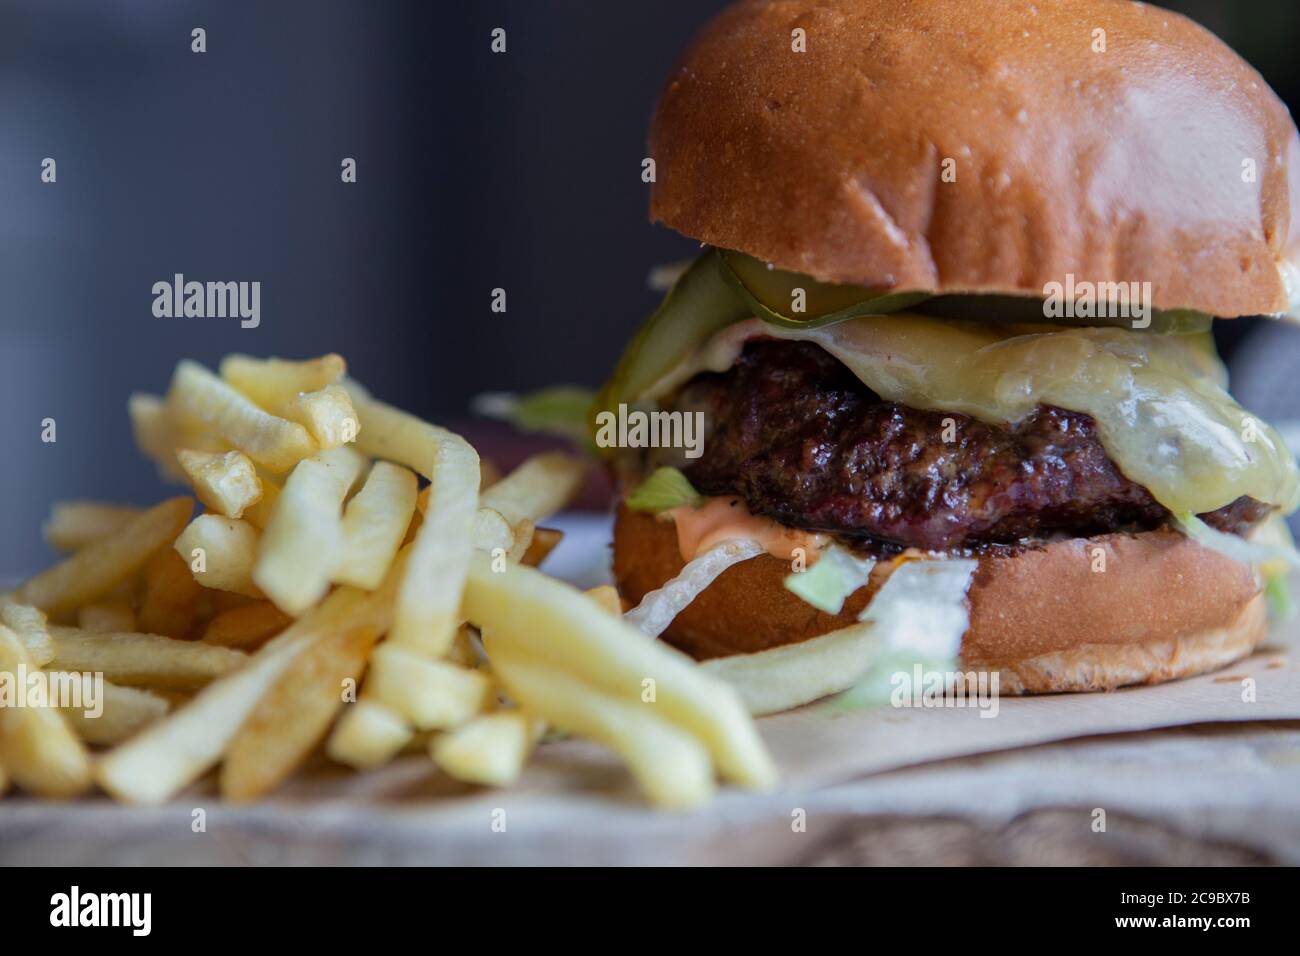 A cheeseburger and fries Stock Photo